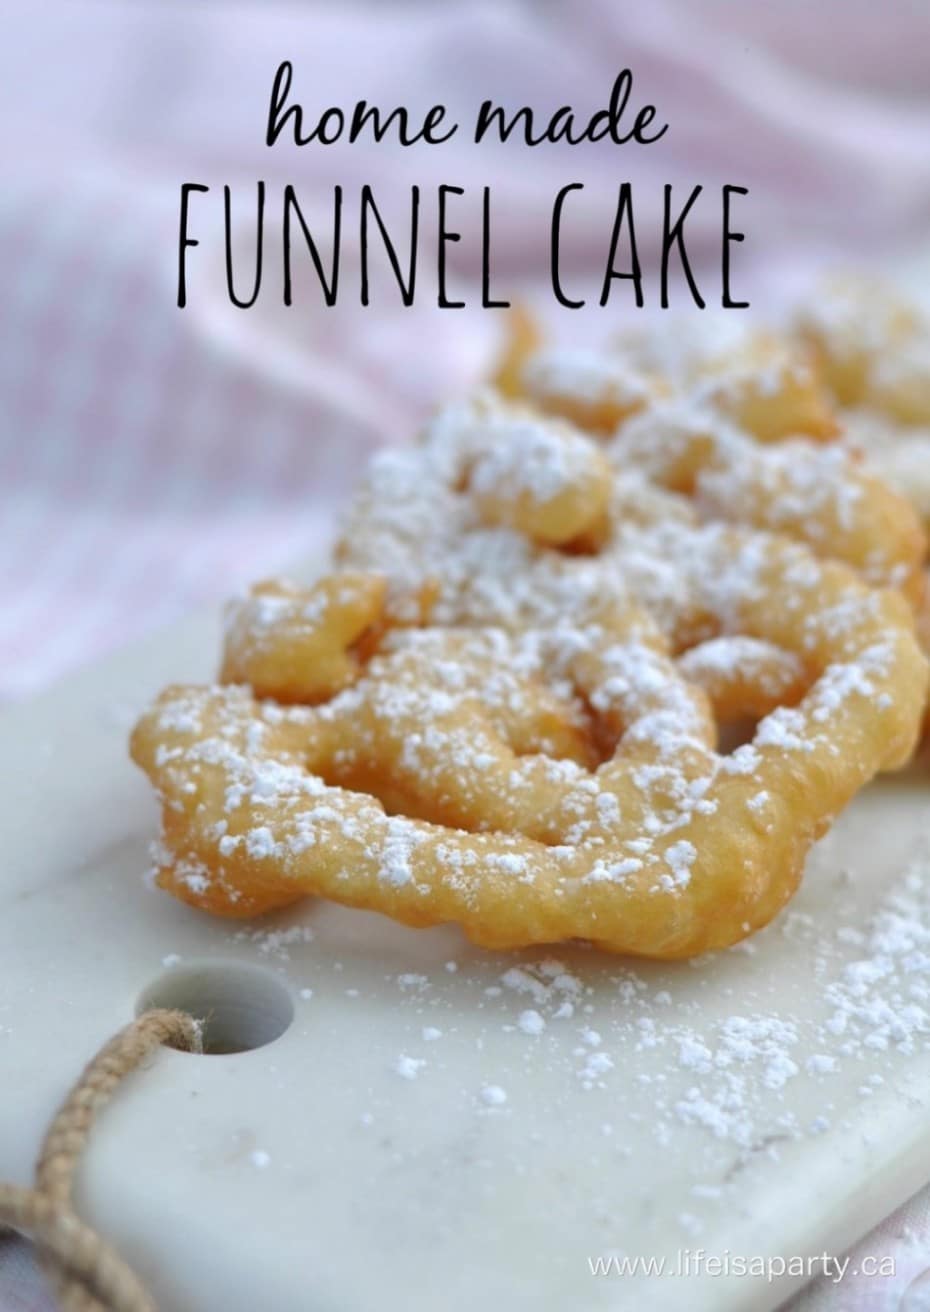 Homemade Funnel Cake Recipe -bring the carnival home with this easy, inexpensive recipe sure to impress guests, and remind you of a day at the fair.